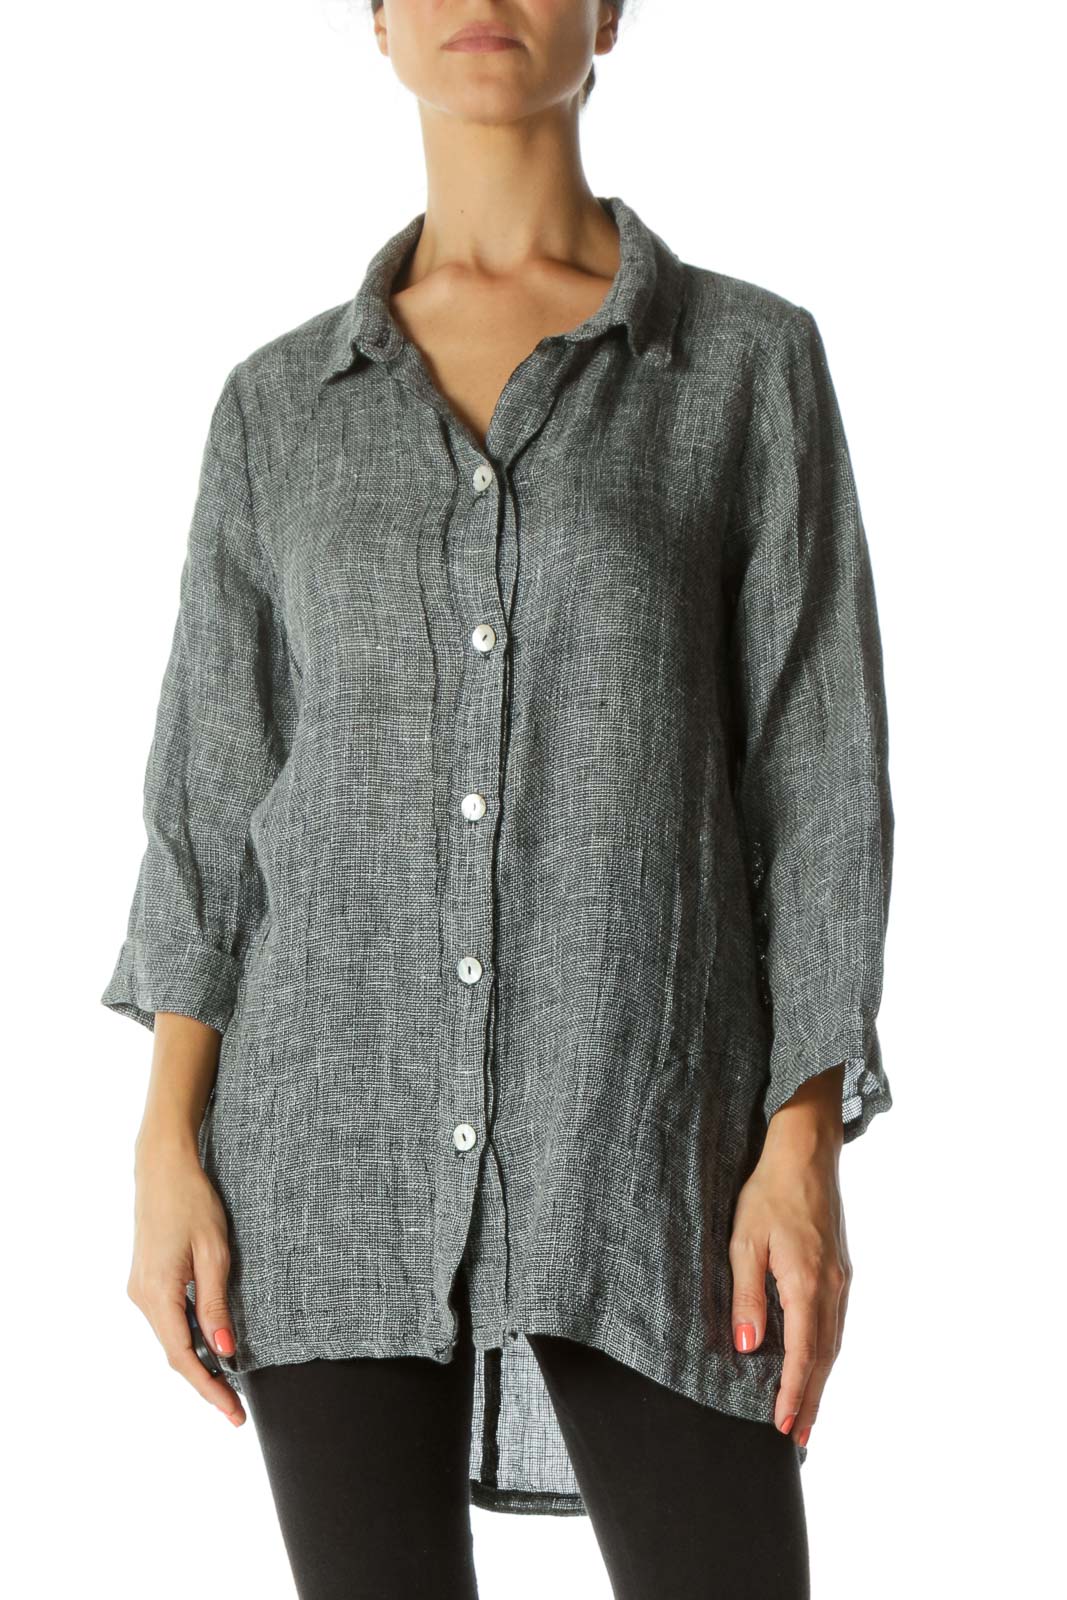 Gray Over Sized Knit Top  Front